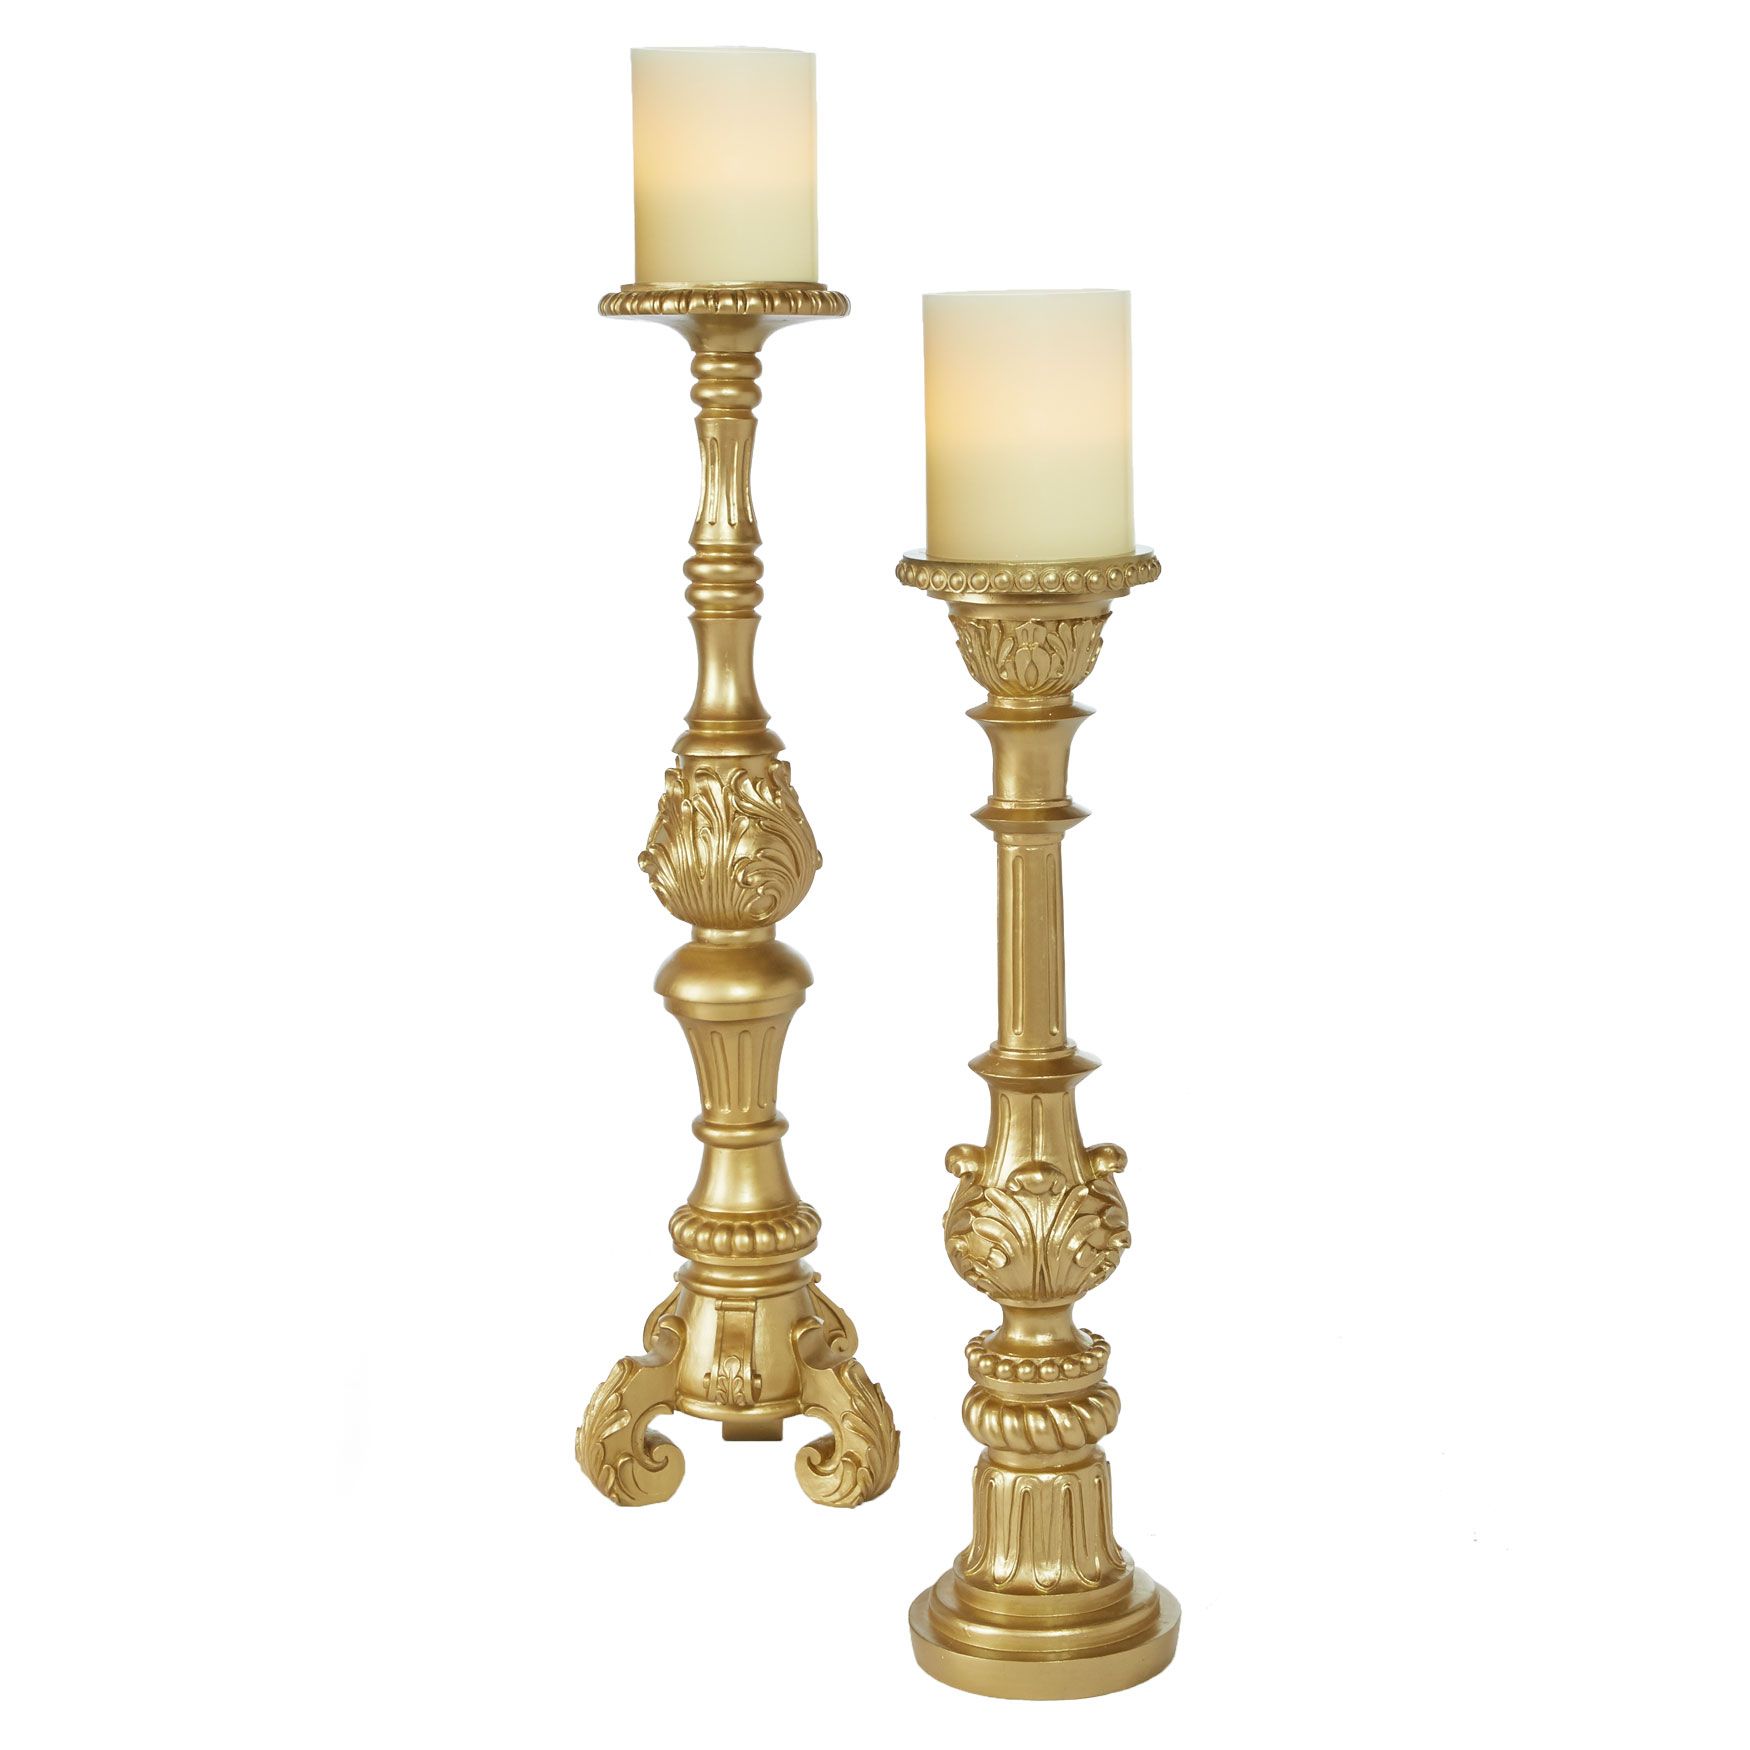 Tall Gold Candlesticks, Set of 2 0 Gold - BrylaneHome | Brylane Home